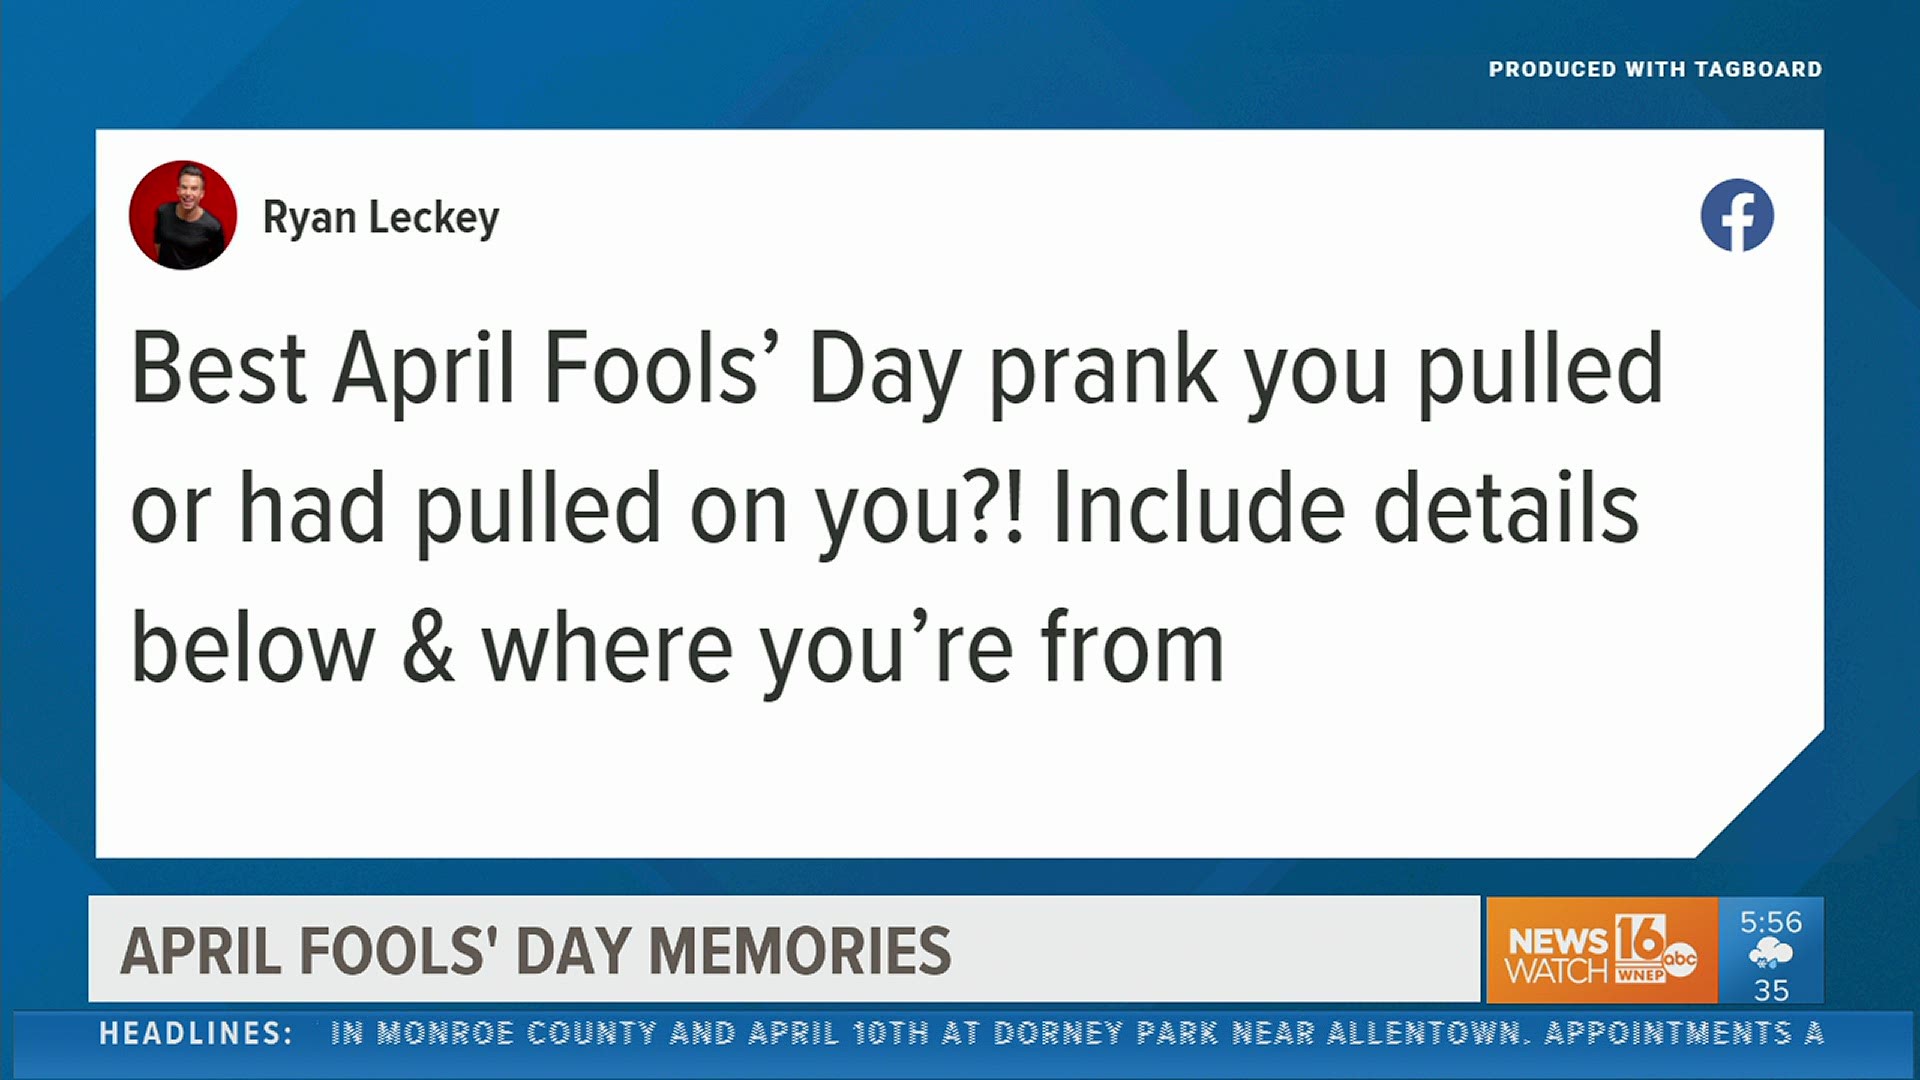 From not-so-tasty surprising baked goods to saying 'I do,' on April Fools’ Day, viewers had a whole host of memories to share. Ryan Leckey highlighted a few of them.